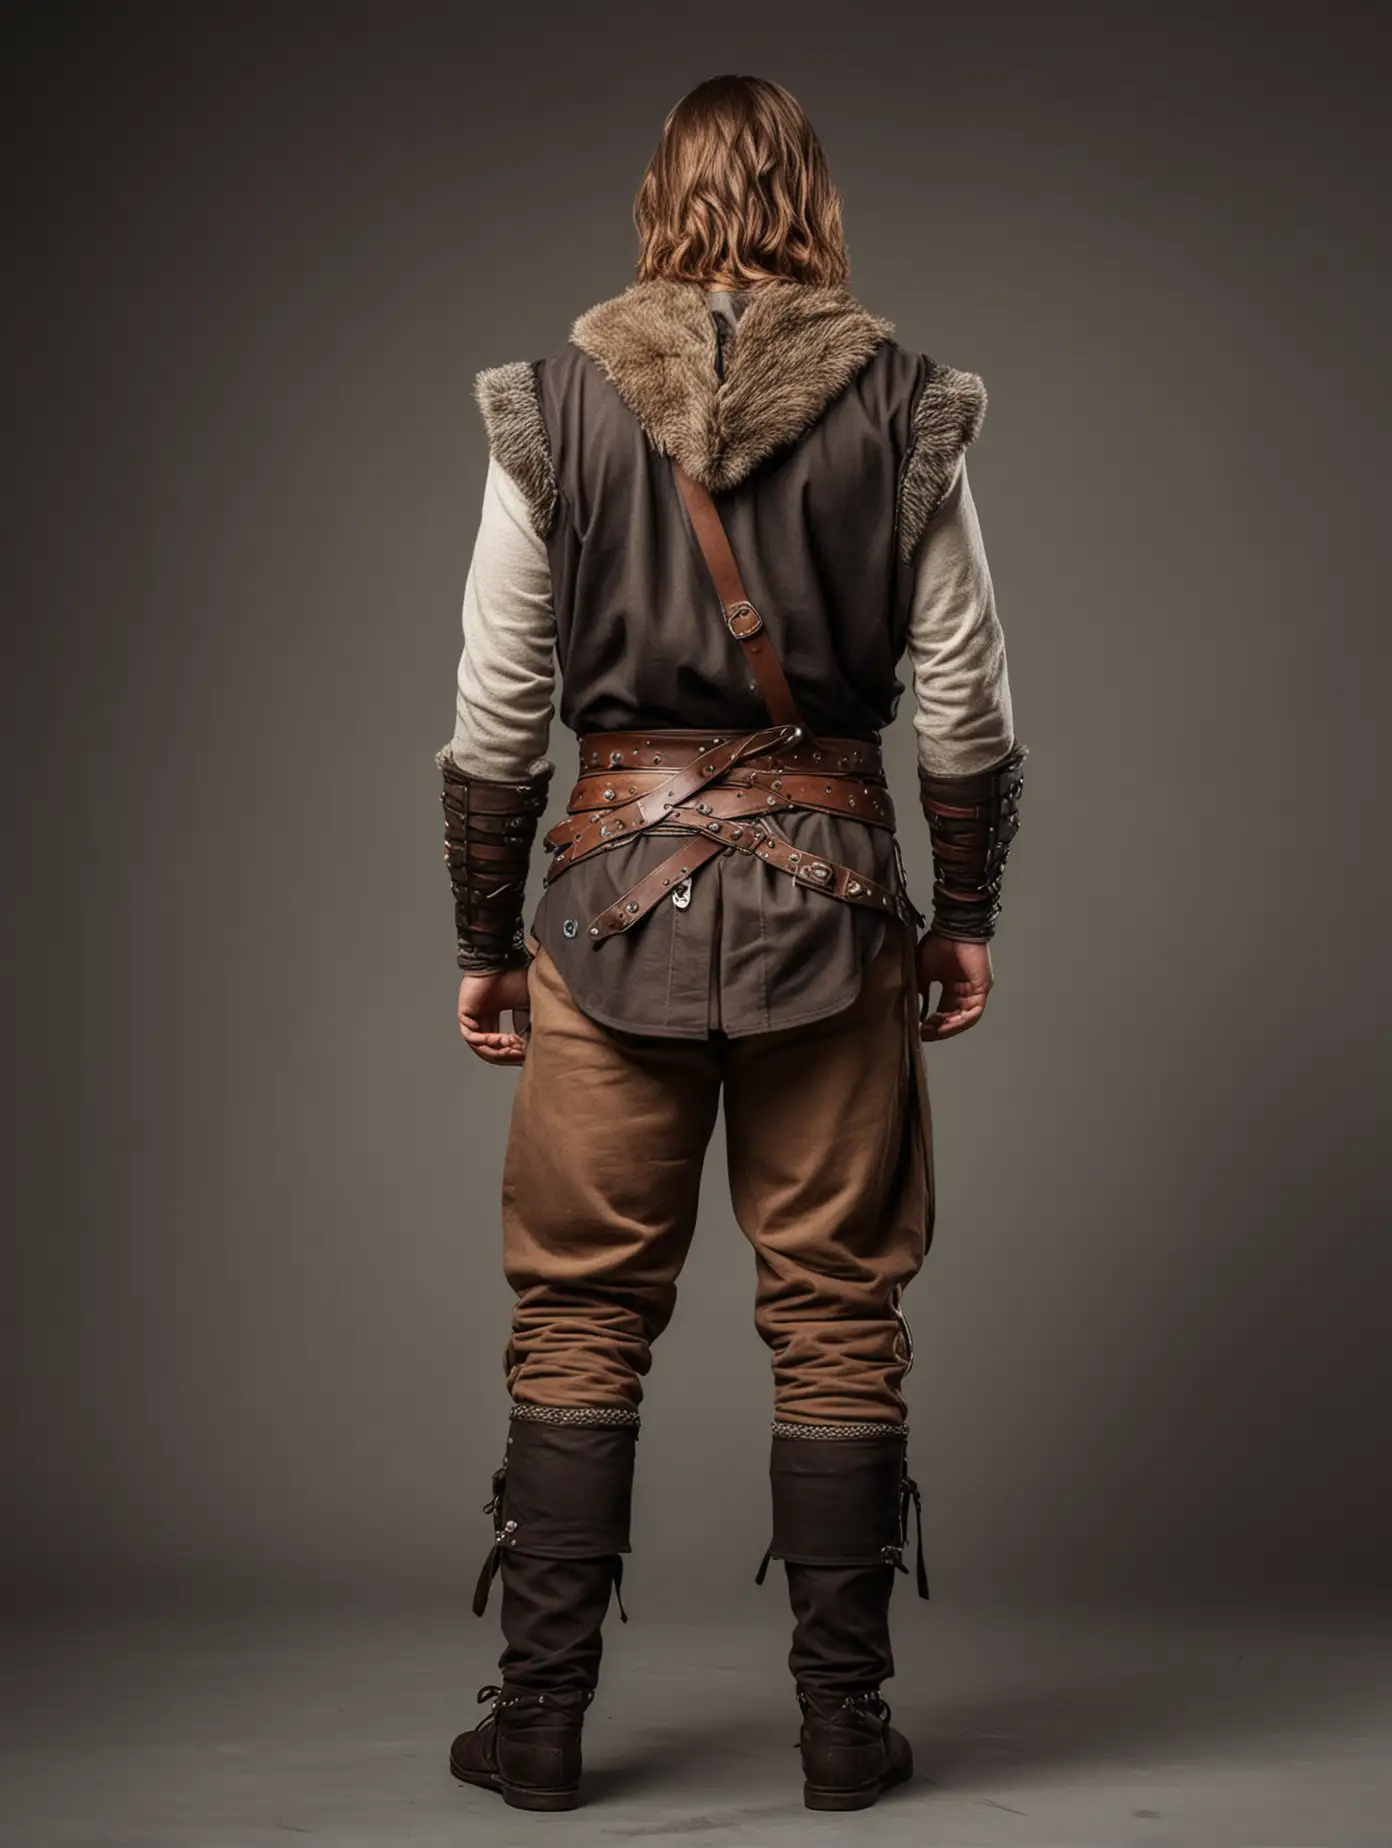 beautiful viking man with brown medium length hair, full view, wearing pants and warrior gear, back view, show no face
